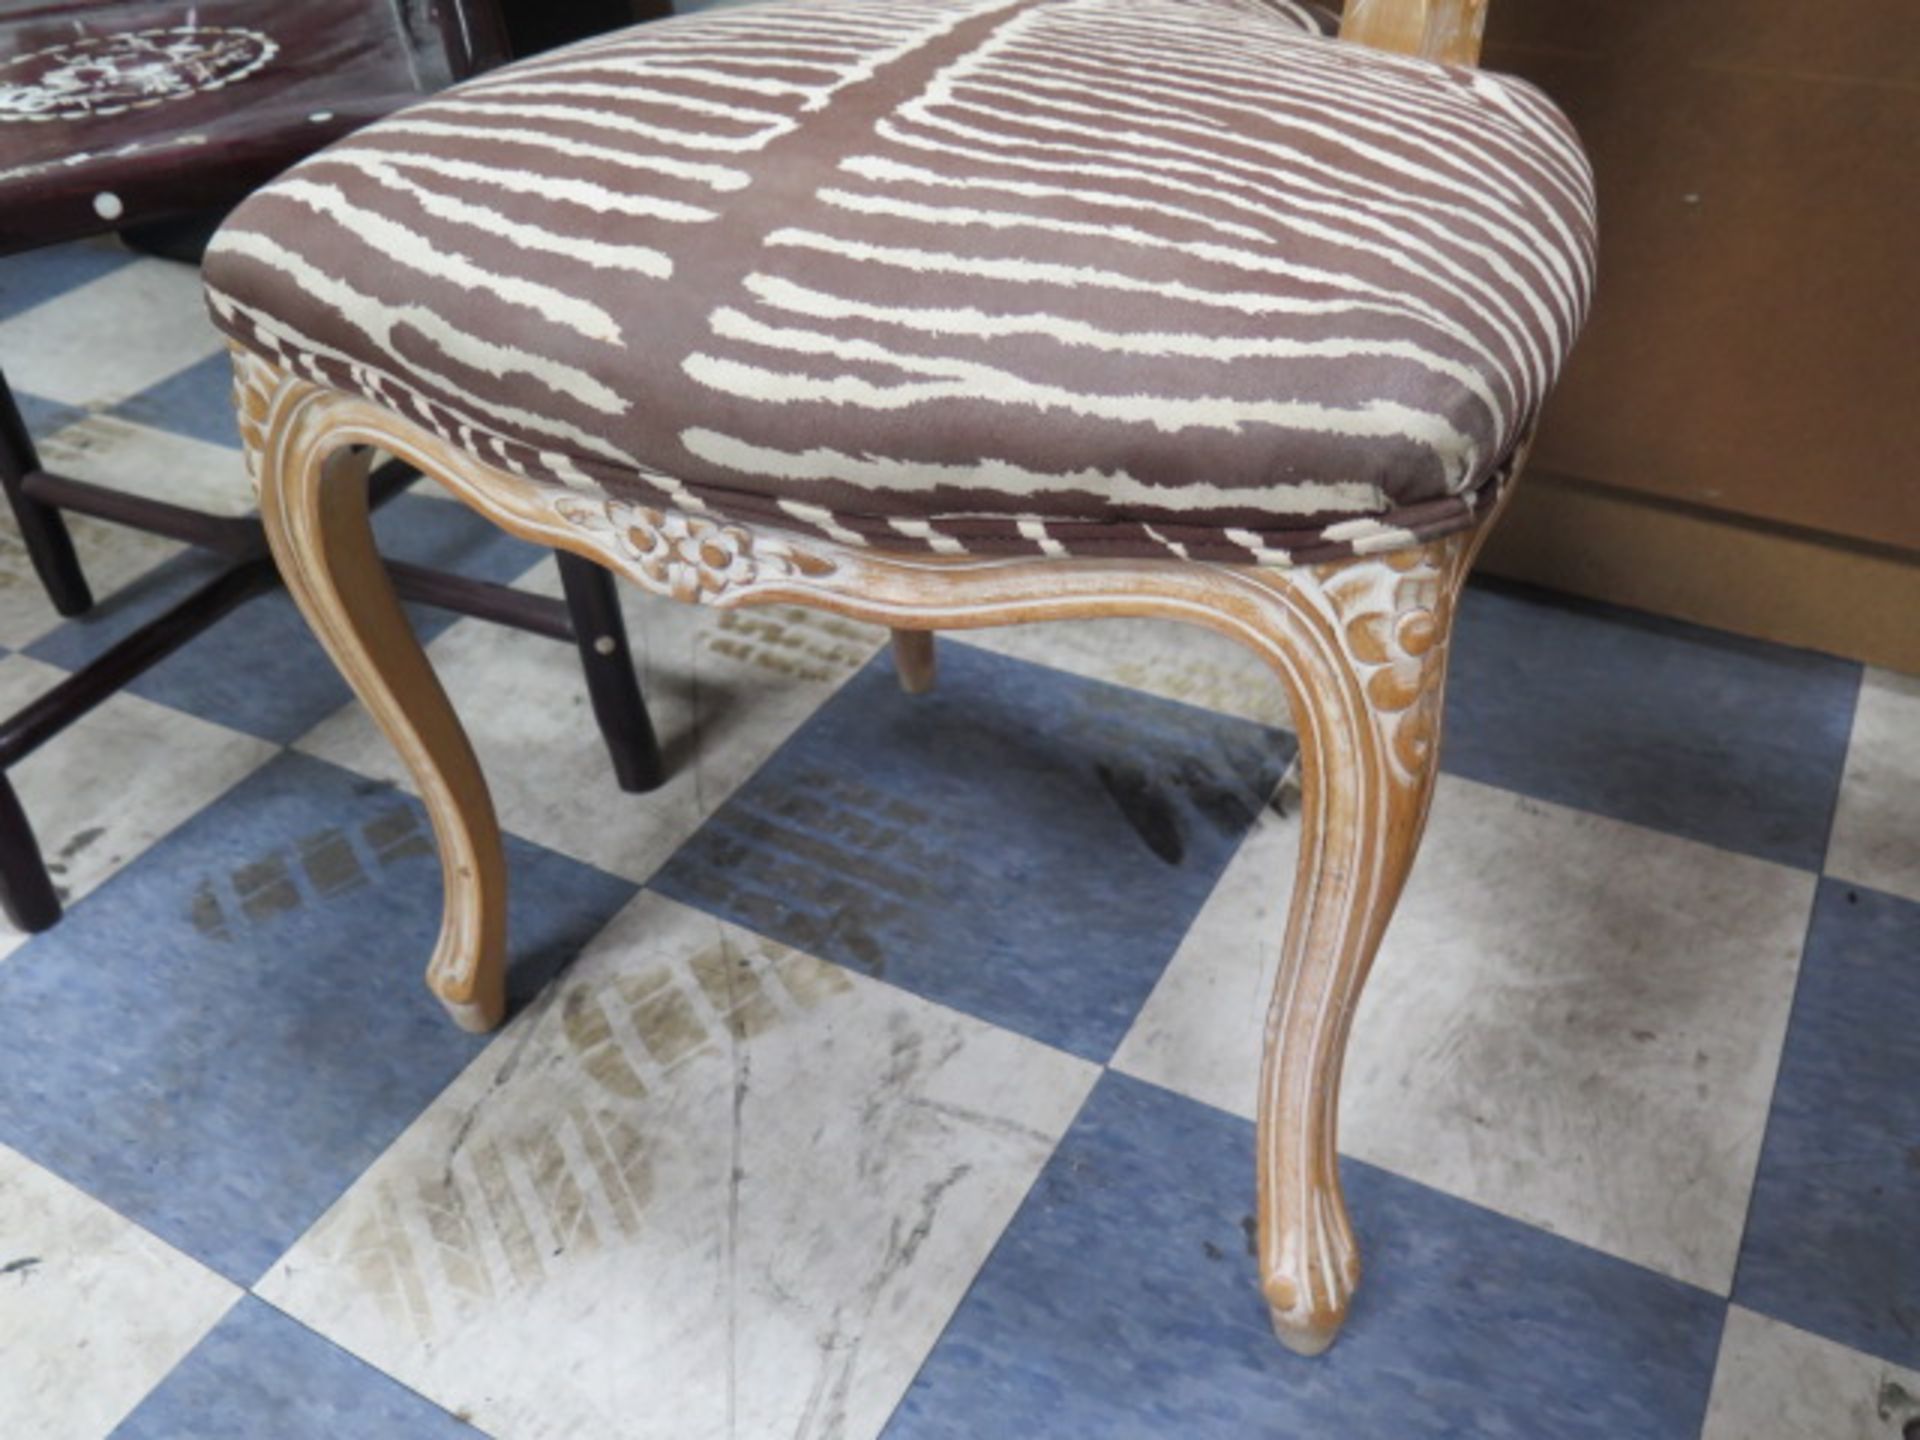 Vintage Corner Chair w/ Mother of Pearl Inlays and Vintage Style French Cane Back Chair (SOLD AS-IS - Image 9 of 10